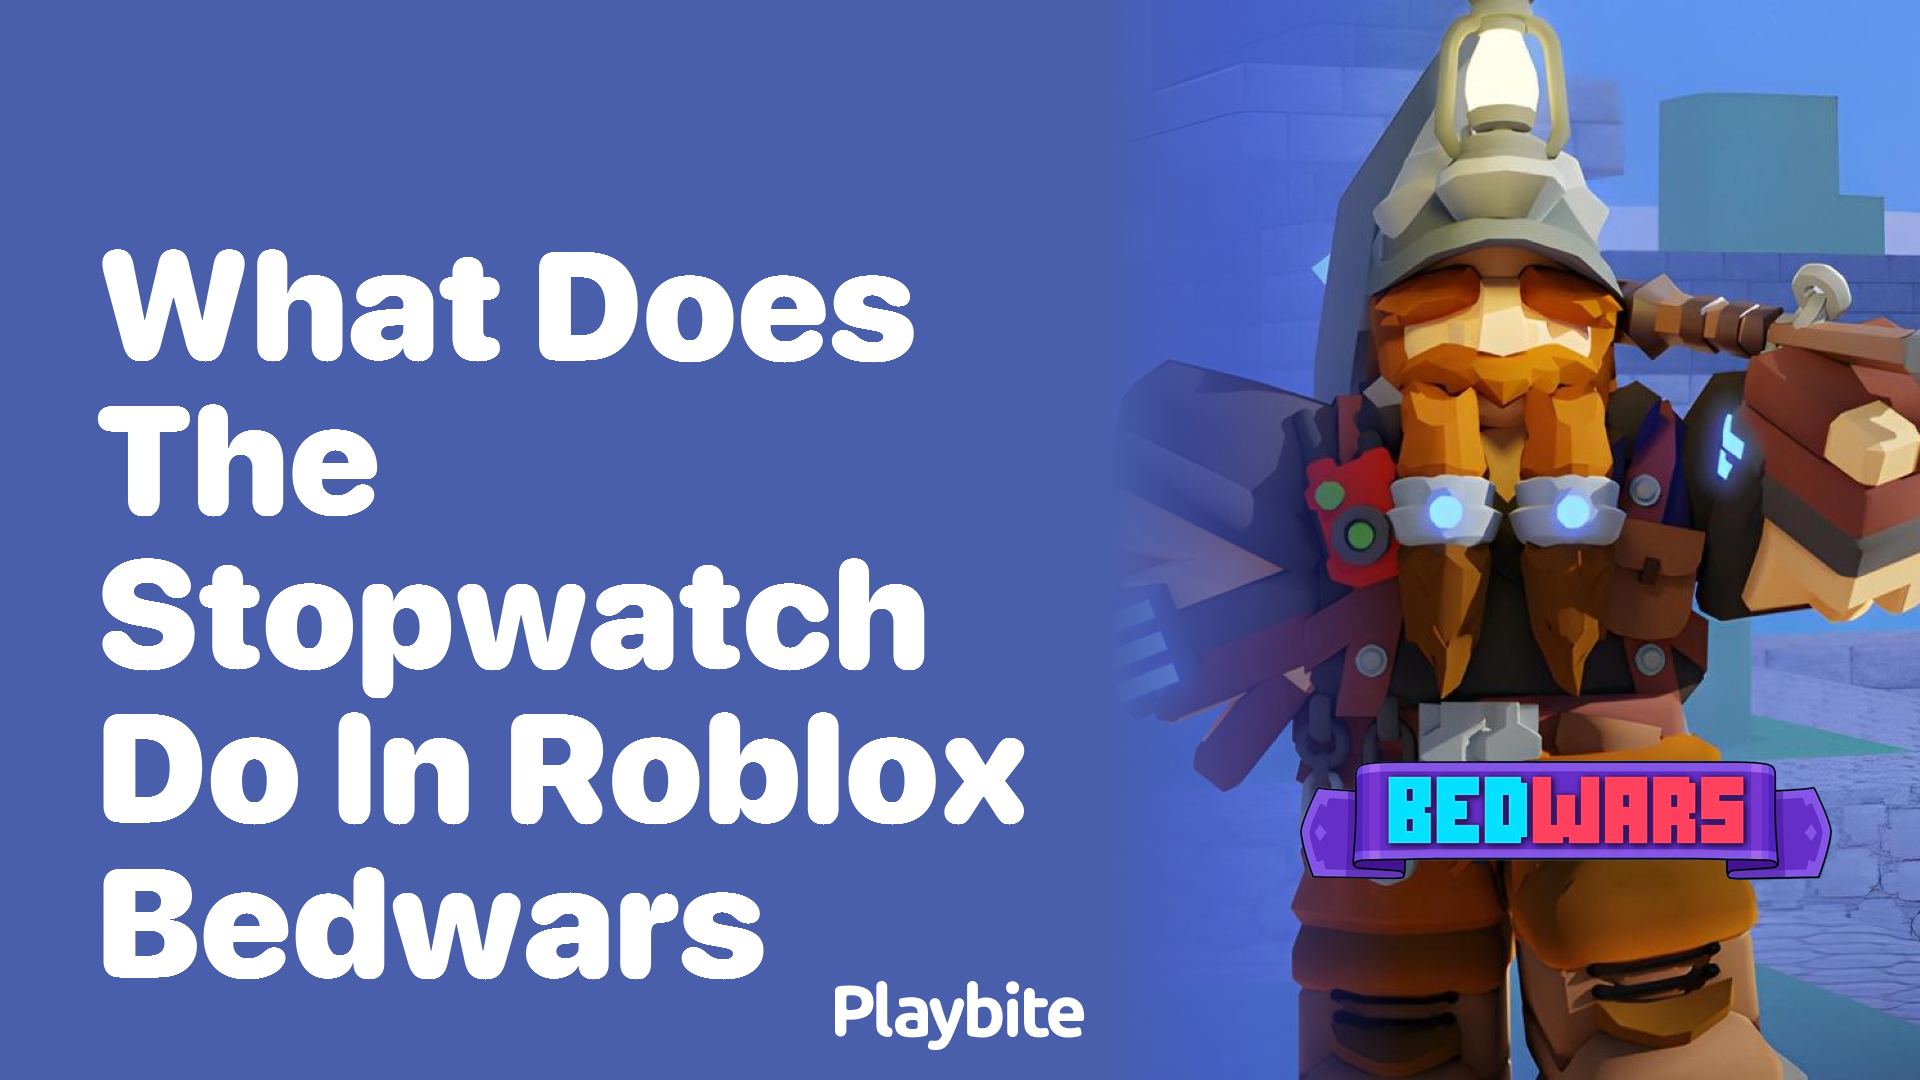 What Does the Stopwatch Do in Roblox Bedwars?